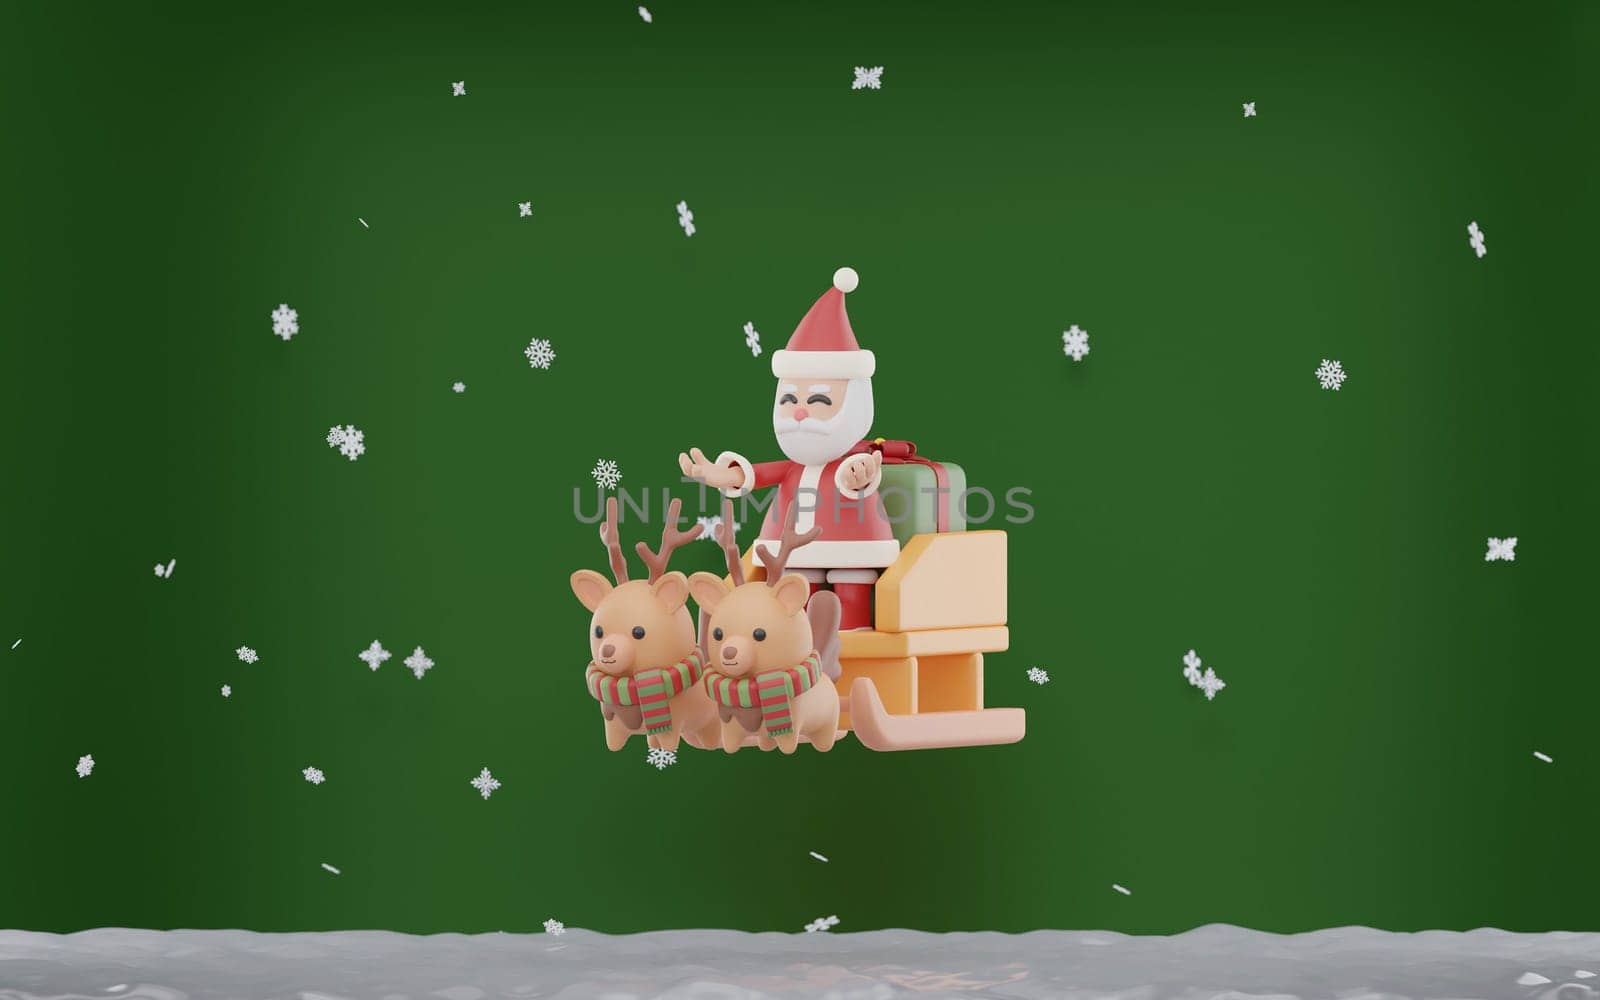 Merry Christmas and Happy New Year, Santa Claus on a sleigh by 2 reindeer, 3d rendering with green background and white Snow covered, 3d rendering illustration. by meepiangraphic